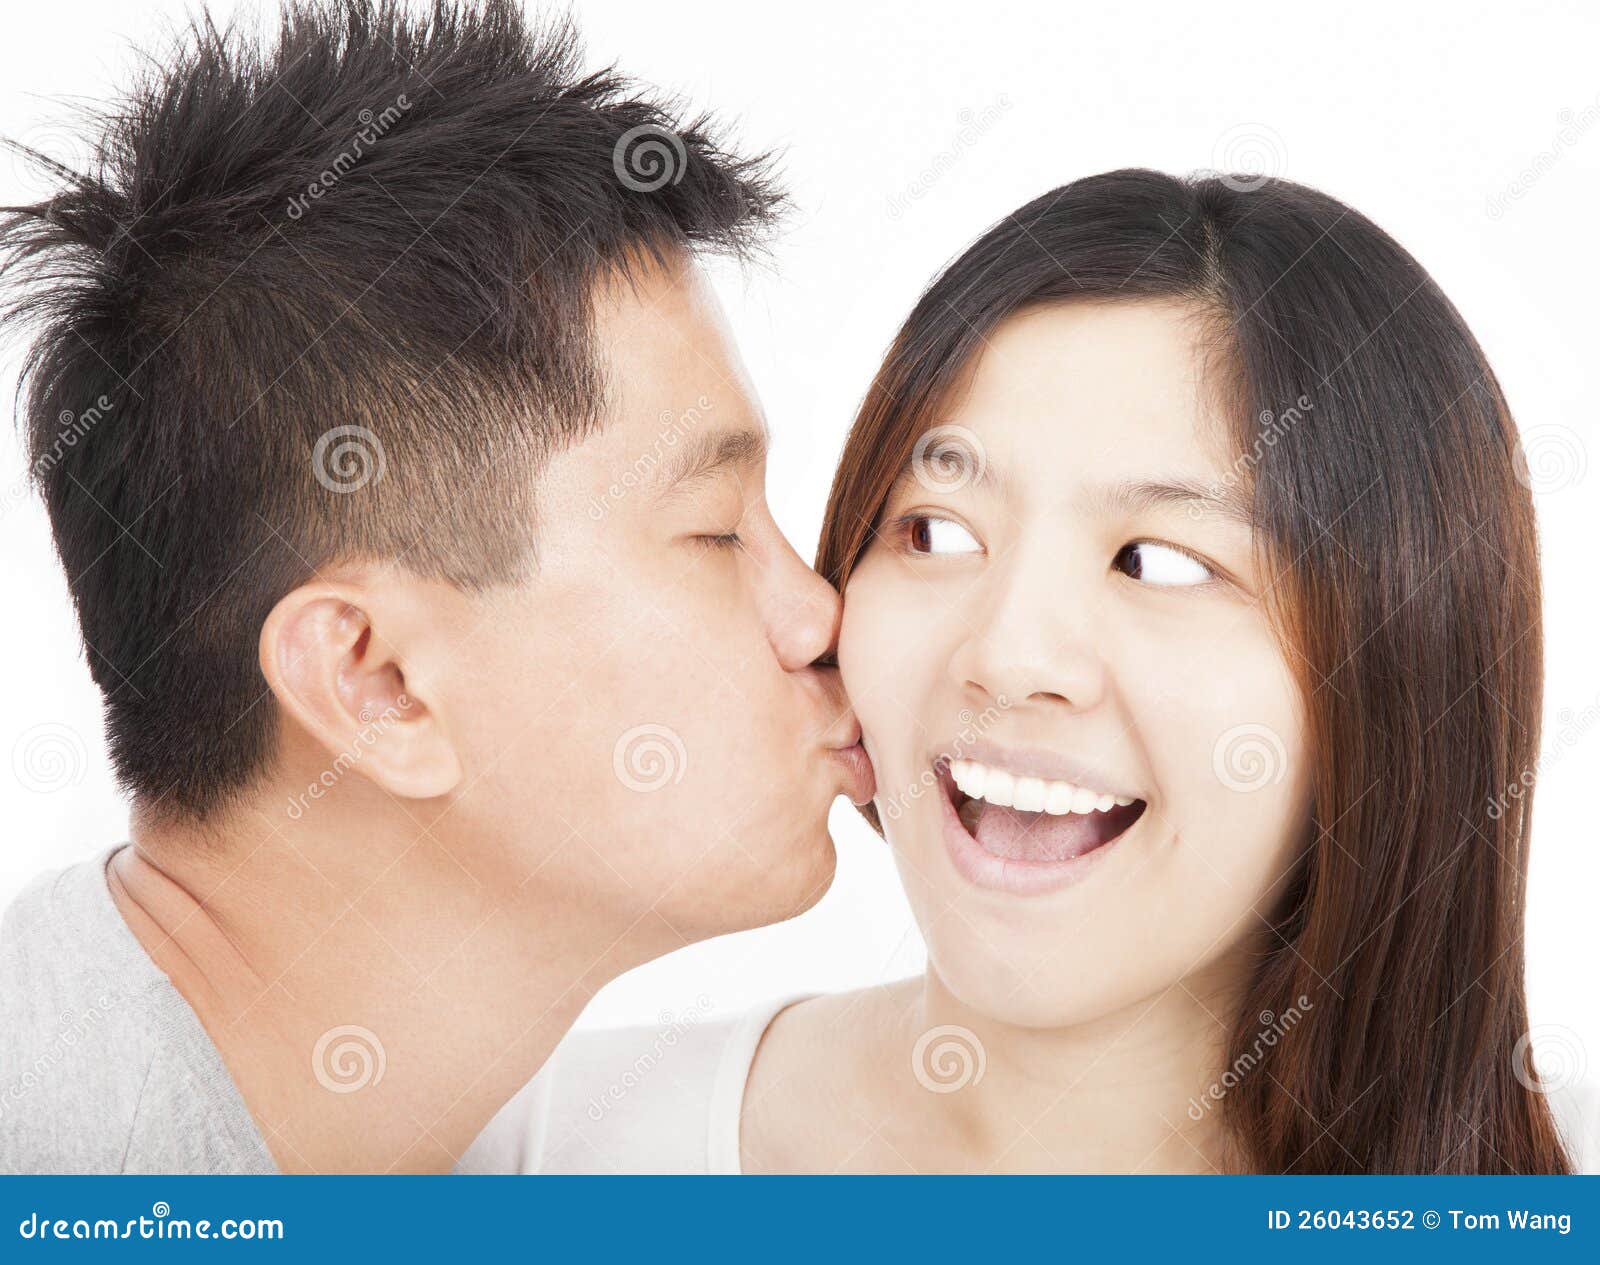 https://thumbs.dreamstime.com/z/asian-young-couple-kissing-26043652.jpg